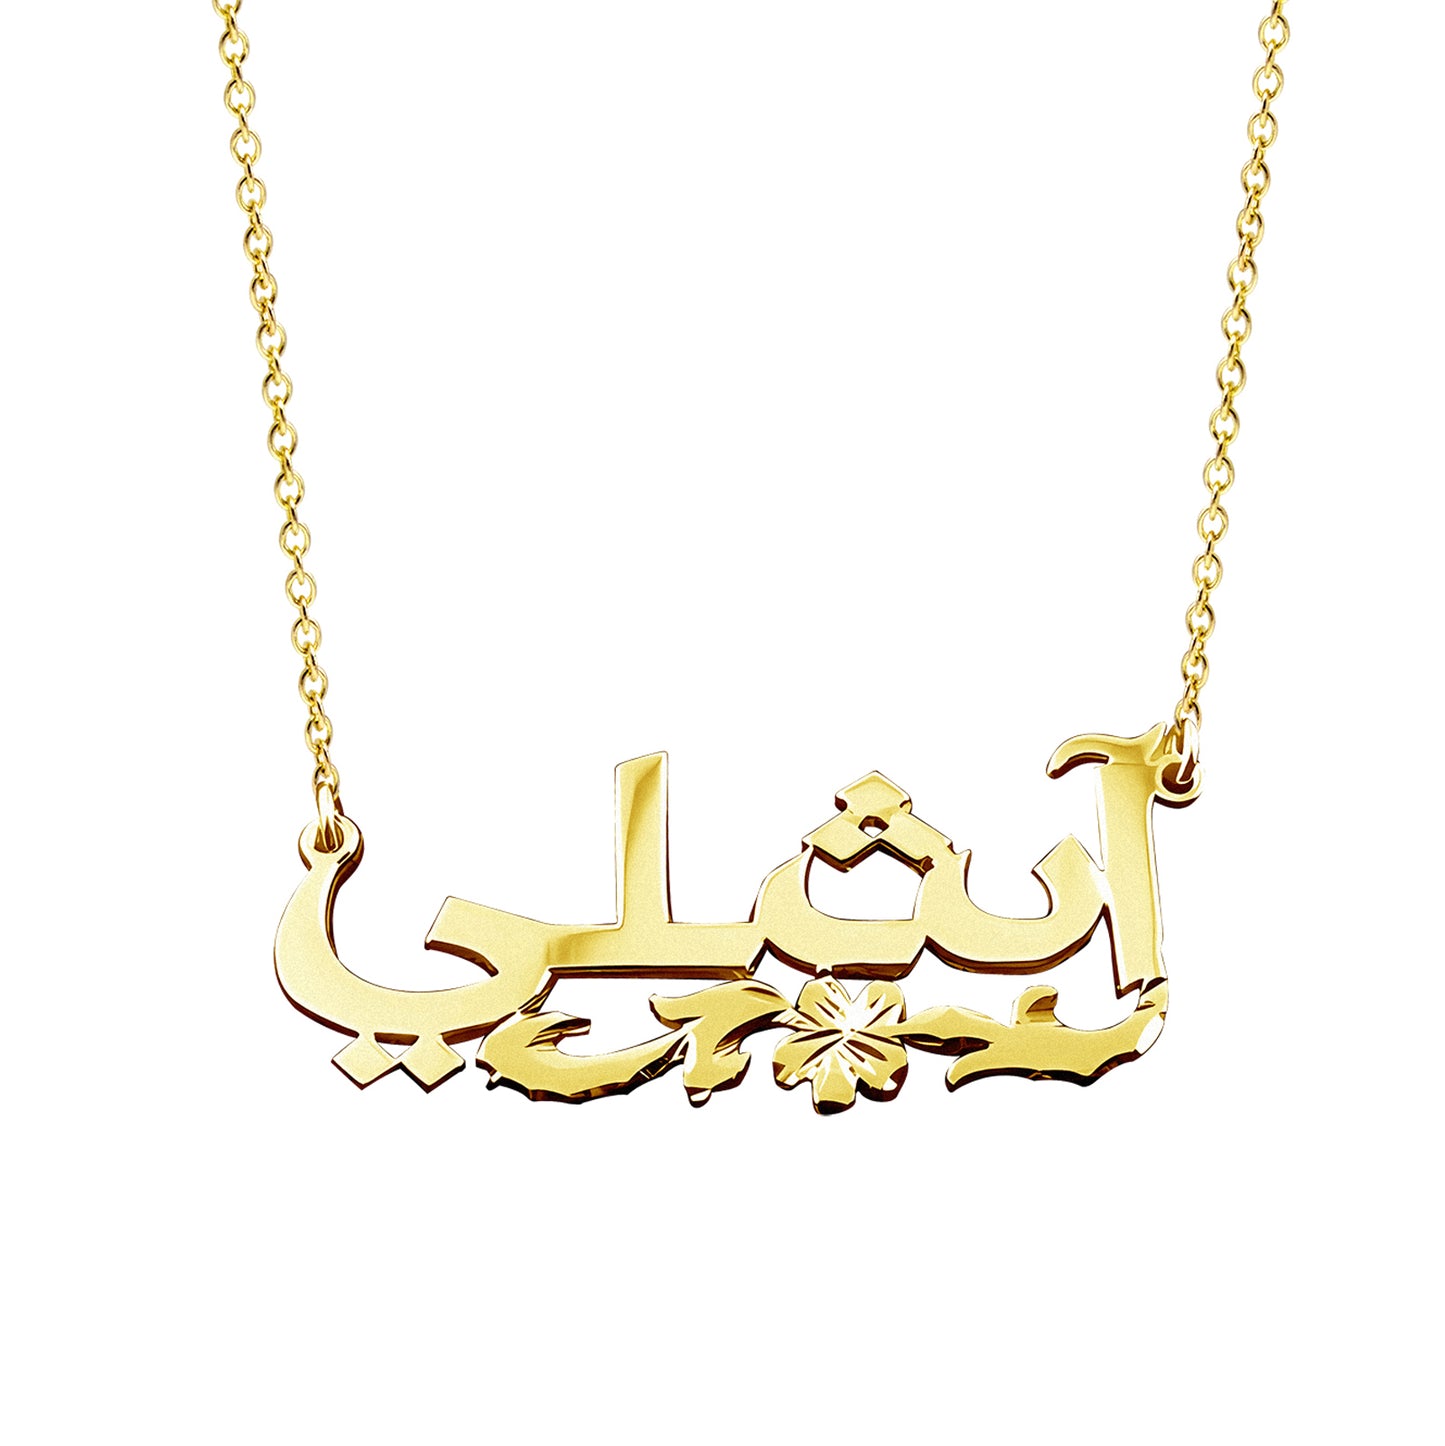 Customized Arabic and Farsi Name Necklaces in 14K Gold | Personalize Your Own Arabic Calligraphy Necklace